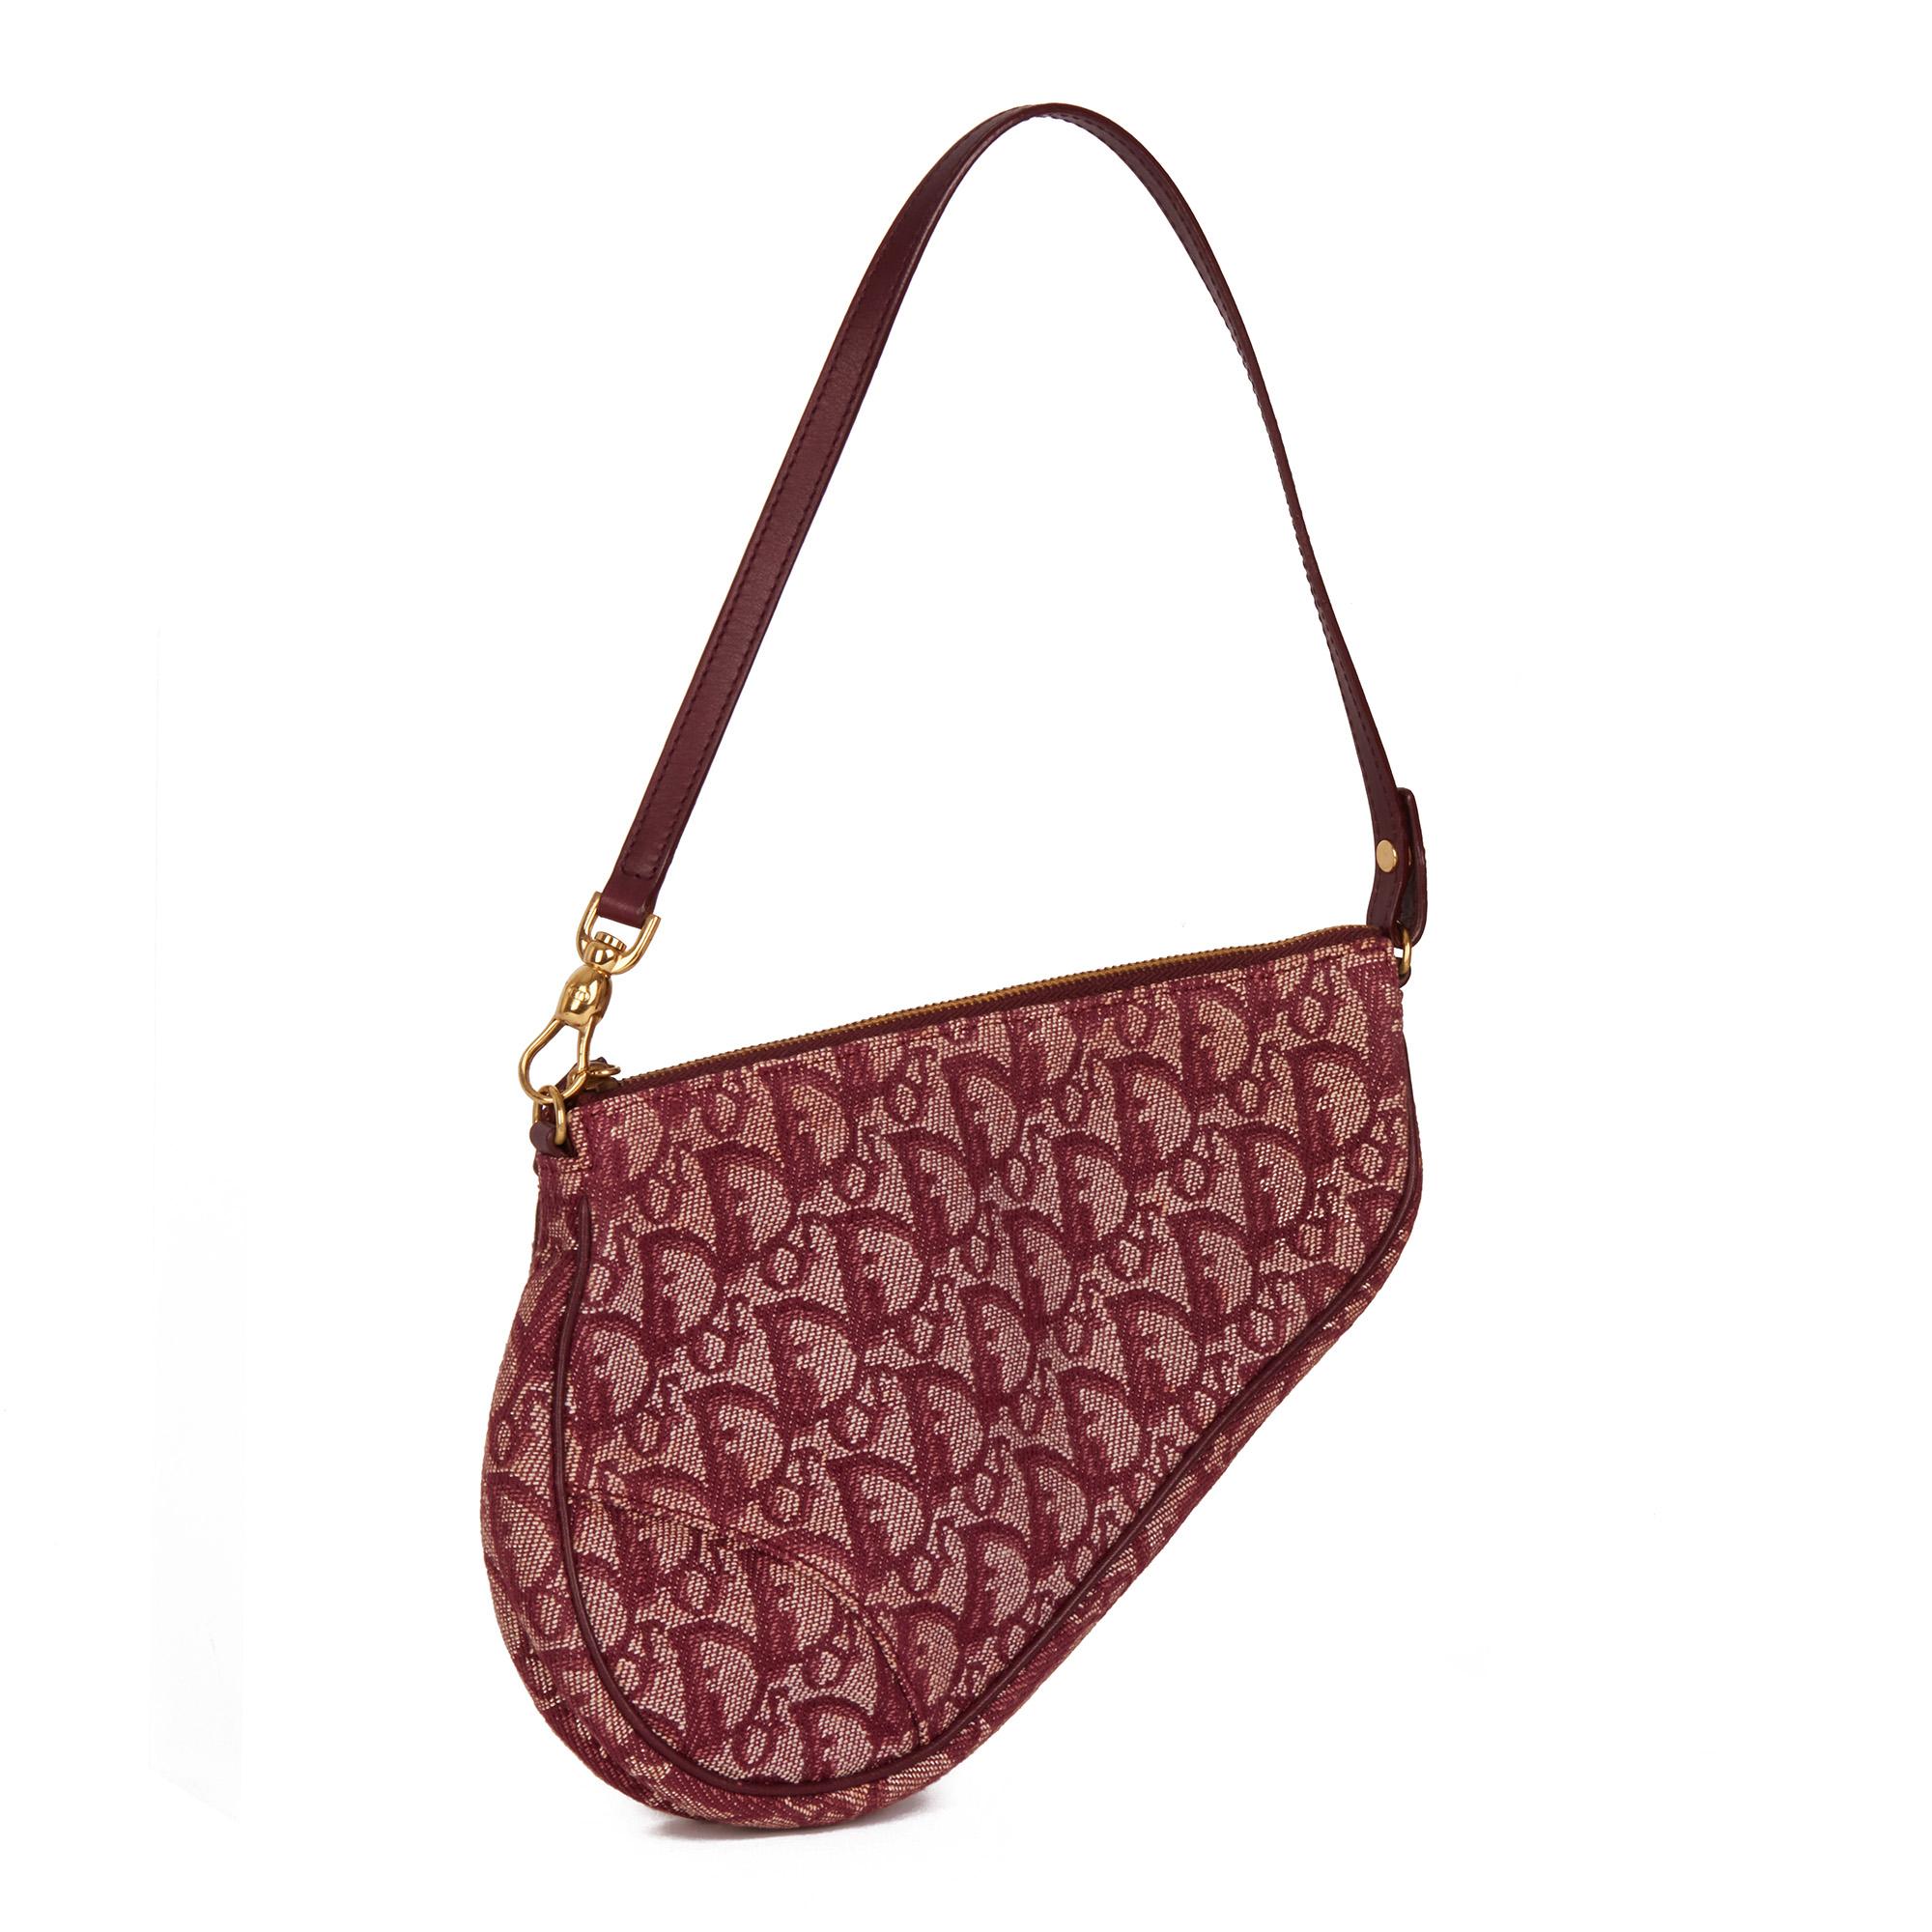 CHRISTIAN DIOR
Bordeaux Monogram Canvas & Calfskin Leather Vintage Mini Saddle Bag 

Xupes Reference: HB4360
Serial Number: MC 0062
Age (Circa): 2002
Authenticity Details: Date Stamp (Made in Spain)
Gender: Ladies
Type: Shoulder, Top Handle

Colour: